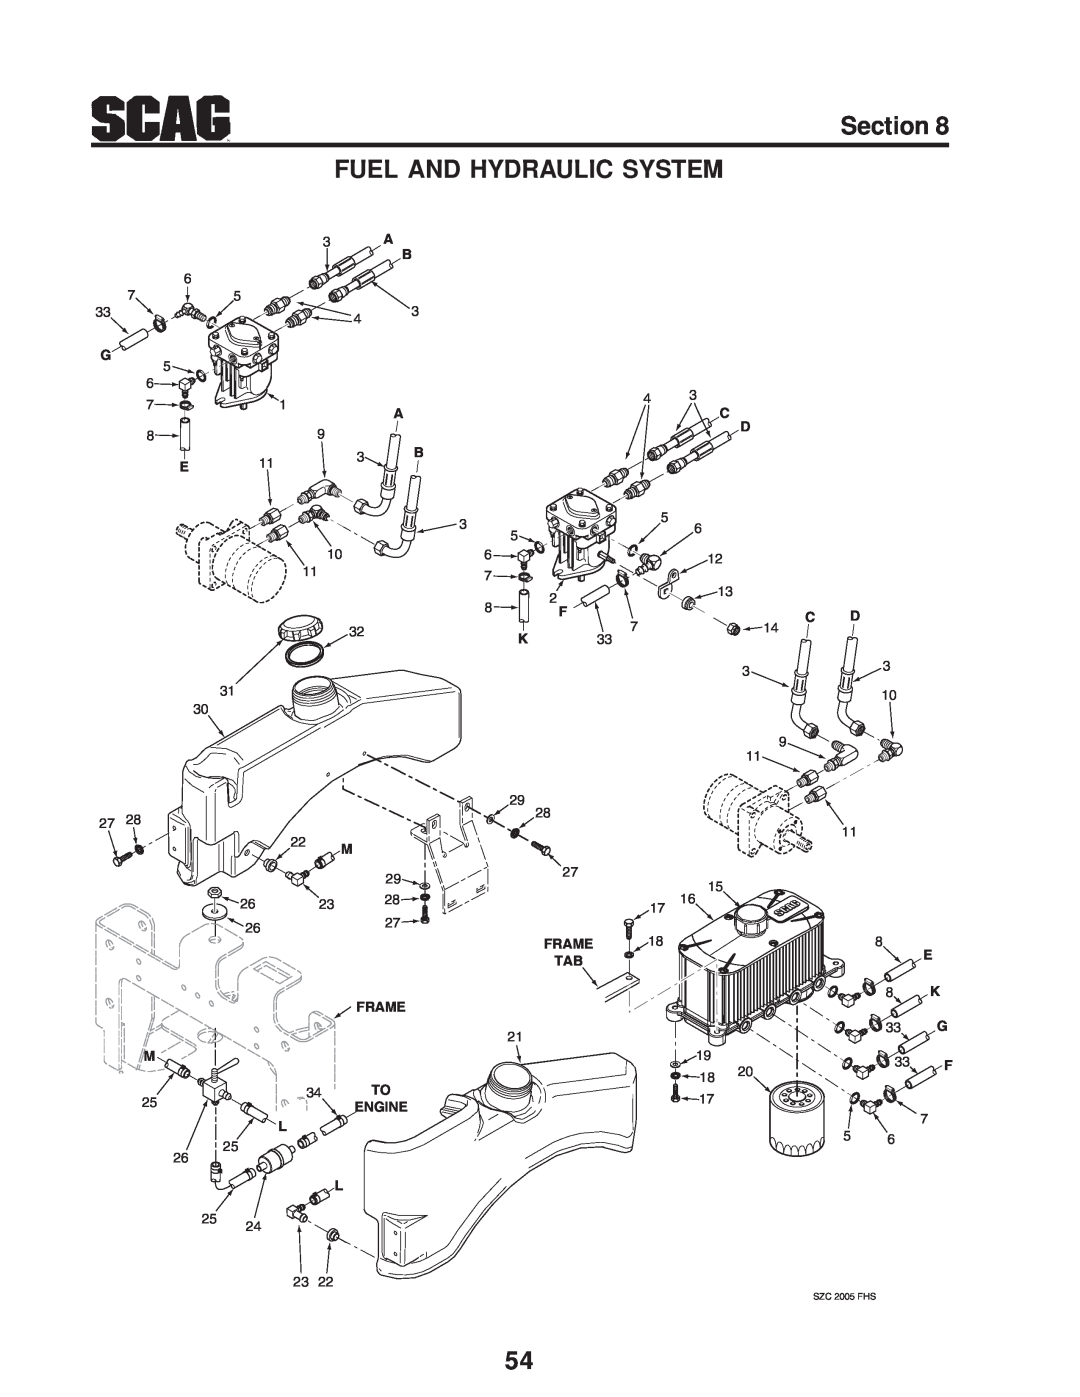 Scag Power Equipment manual Section FUEL AND HYDRAULIC SYSTEM, Frame Tab, Engine, SZC 2005 FHS 